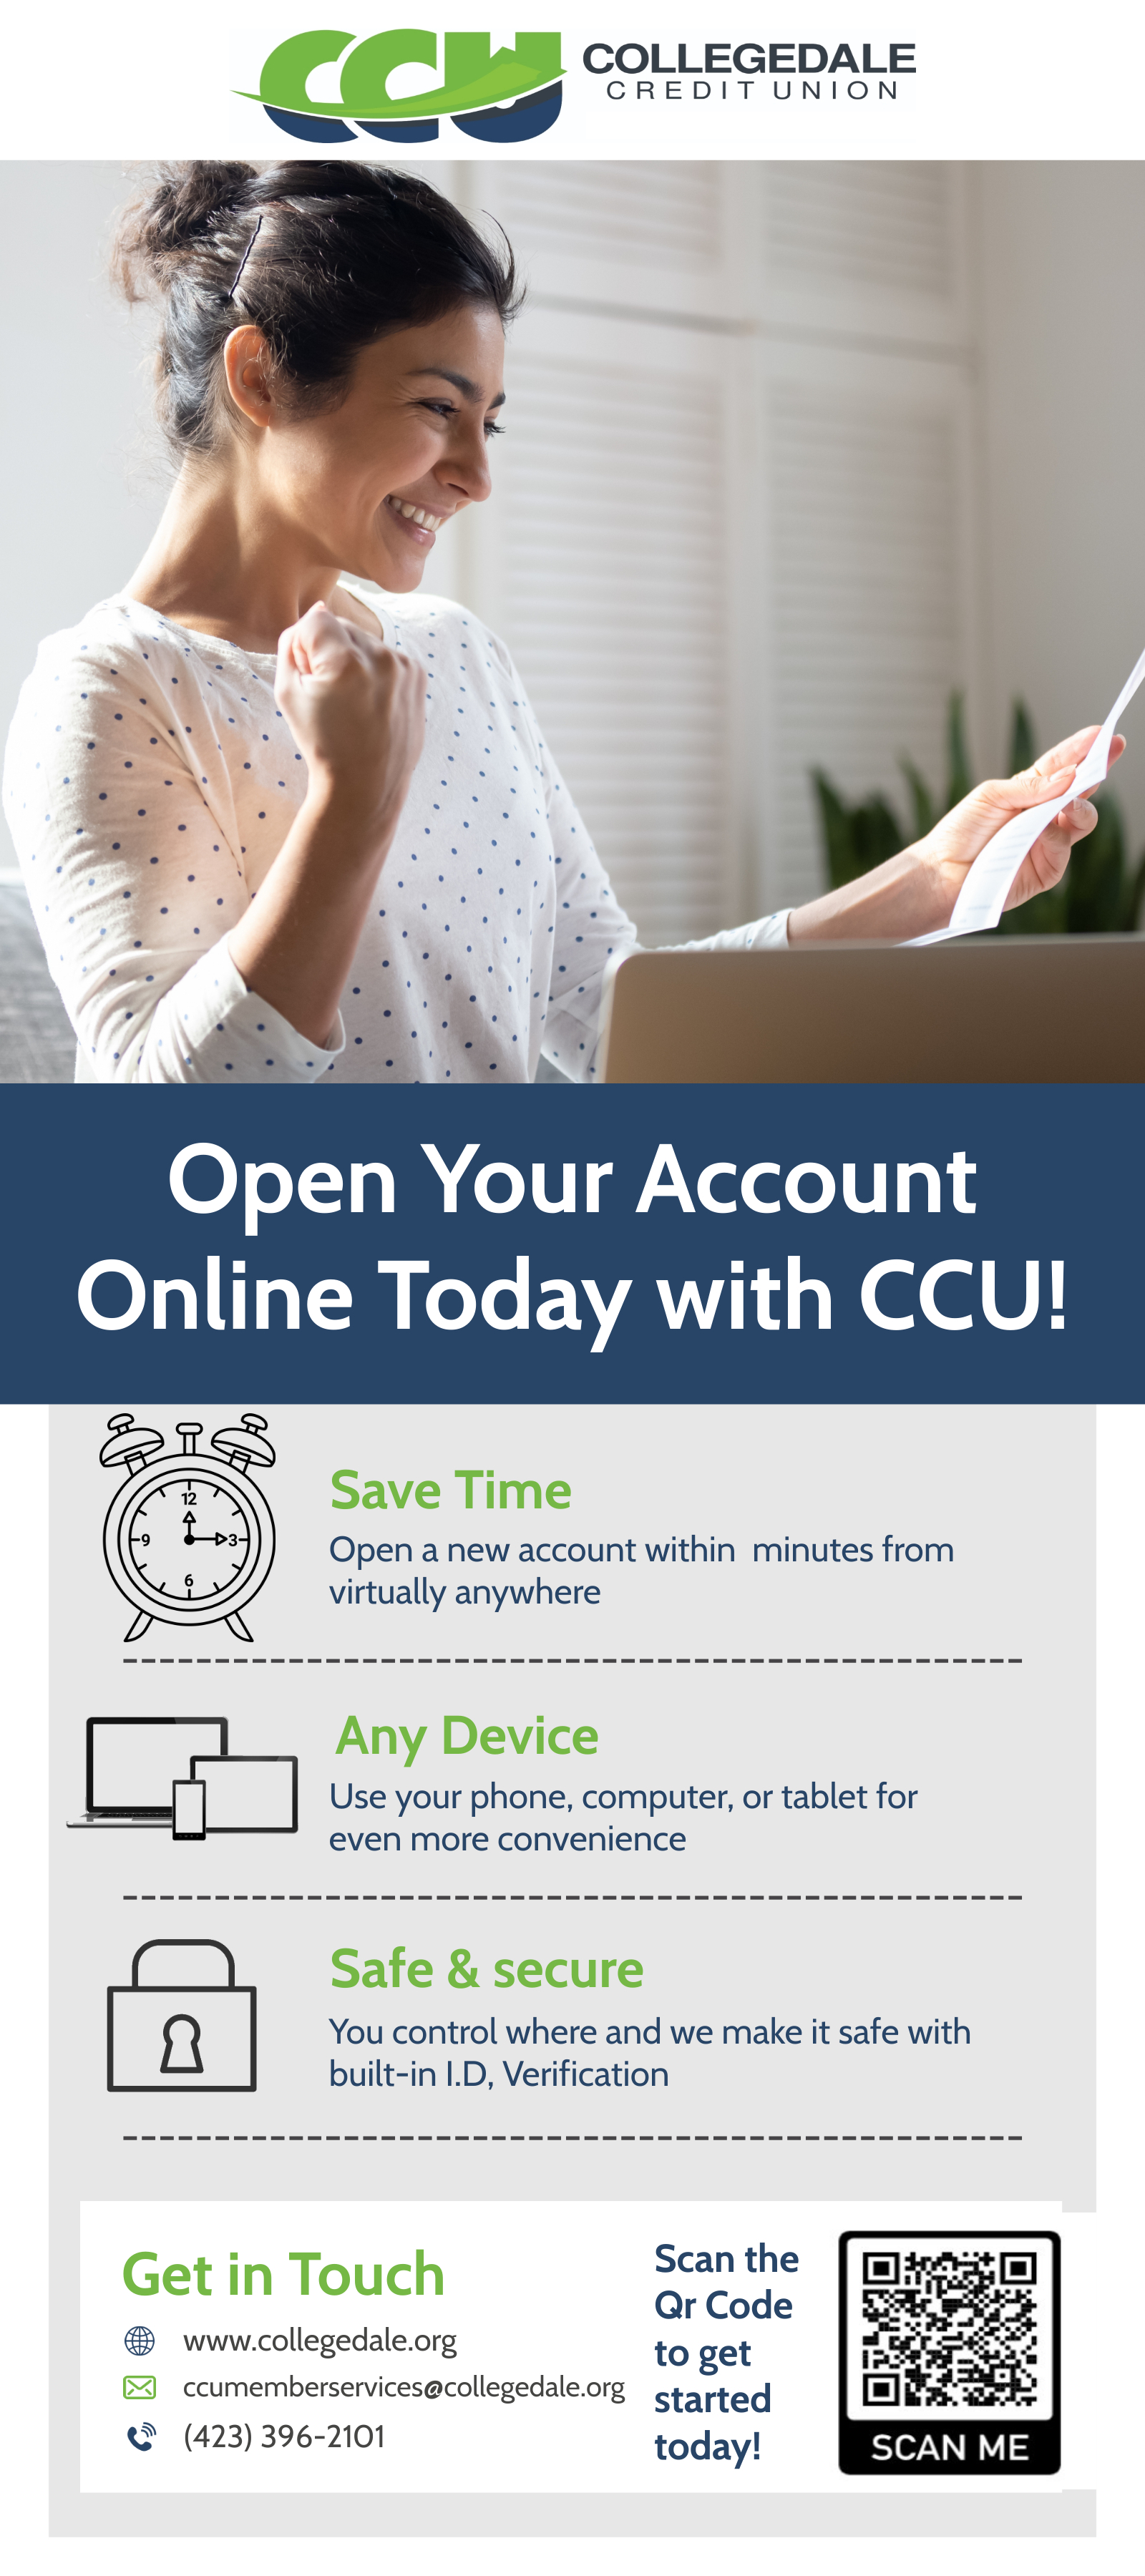 Image of a women smiline while looking at a piece of pper. Text says 'Open Your Account Online Today with CCU!  Save Time: Open a new accoutn within minutes from virtually anywhere.  Any Device: Use your phone, computer, or tablet.  Safe and Secure: You control where and we make is safe with built-in I.D. Verification.' Image of a QR Code and text saying Scan the QR Code to get started today.